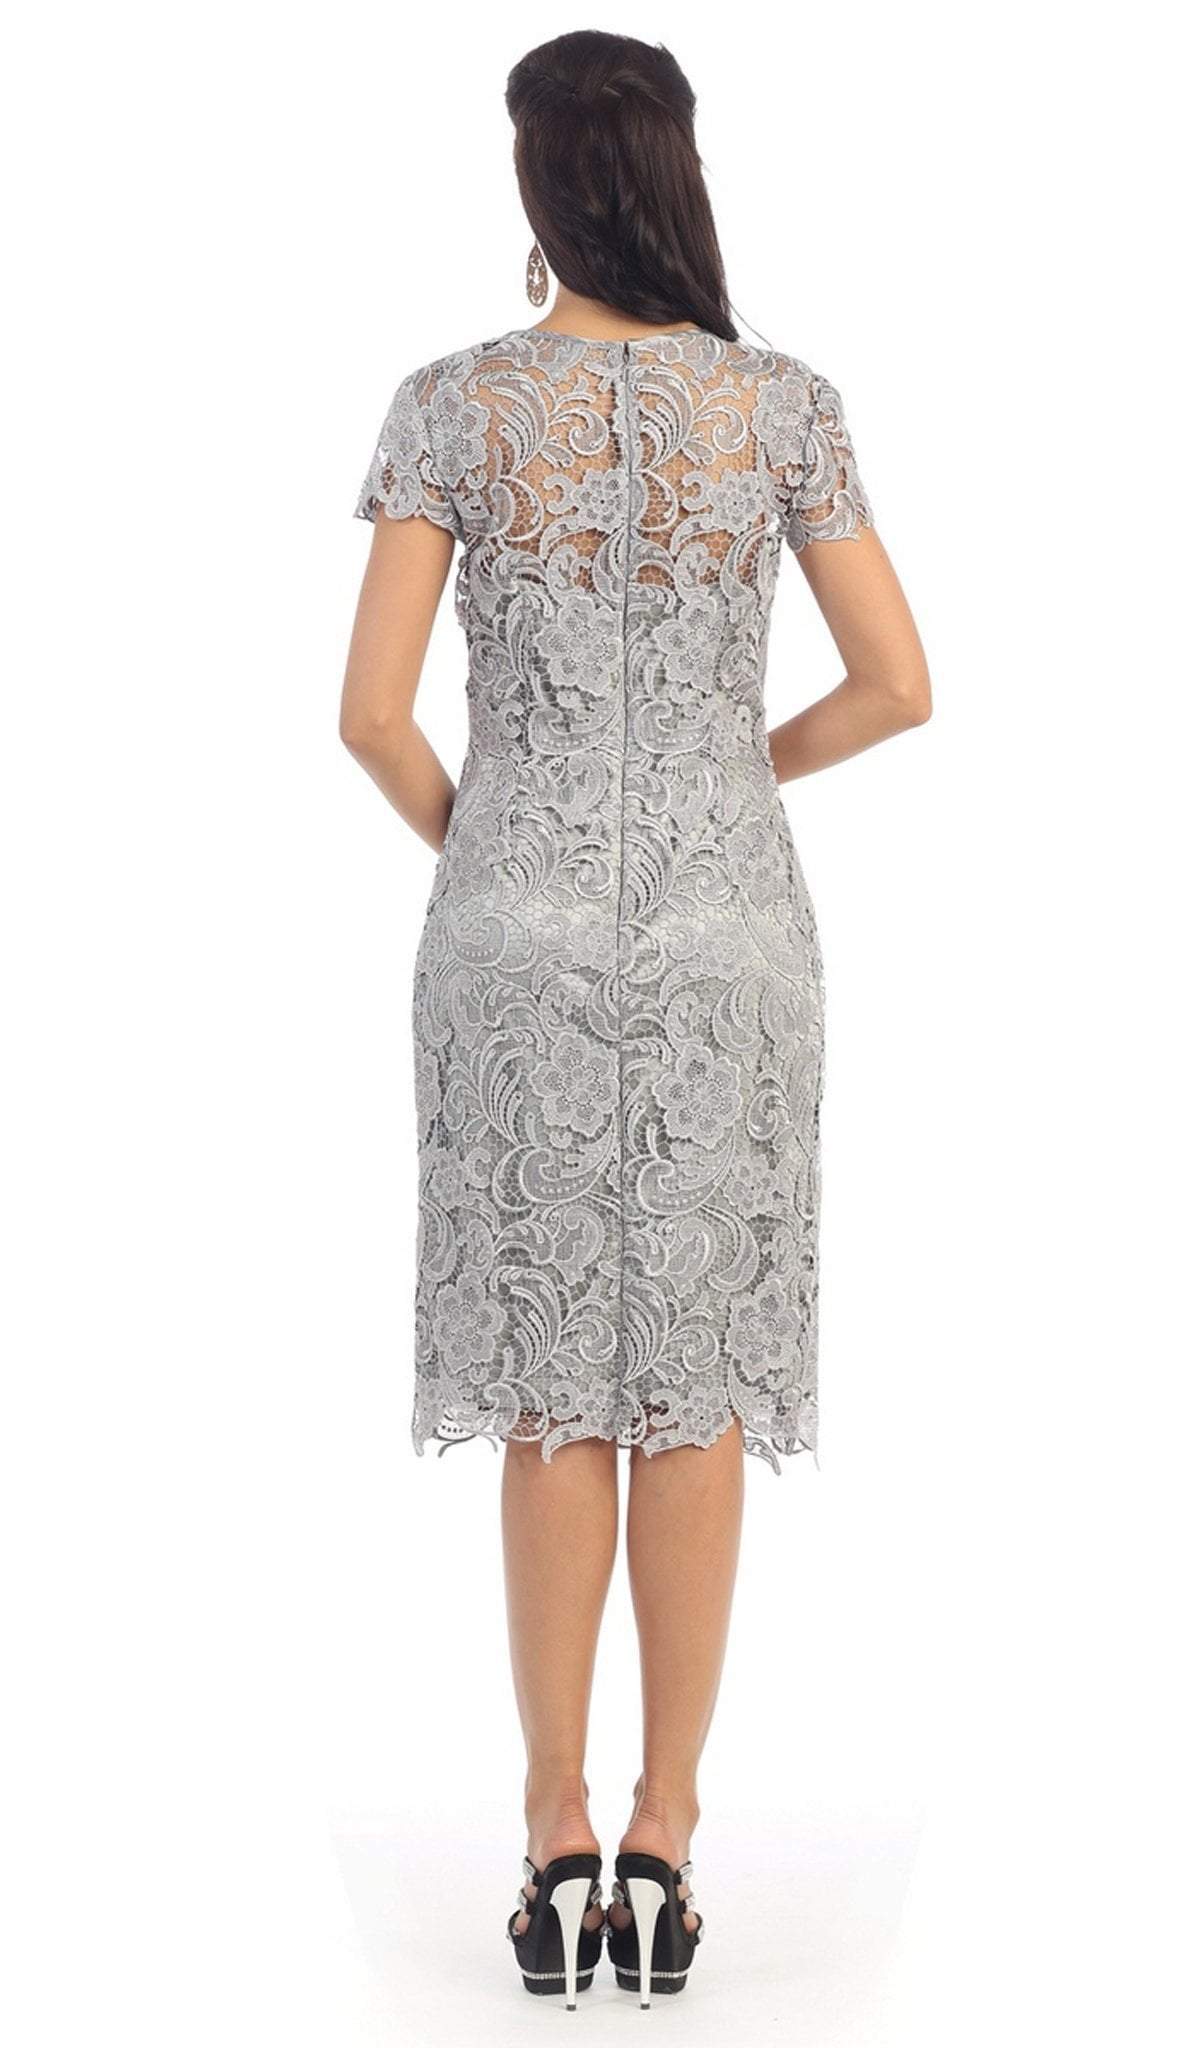 May Queen - Short Sleeve Sheer Scalloped Lace Formal Dress Special Occasion Dress